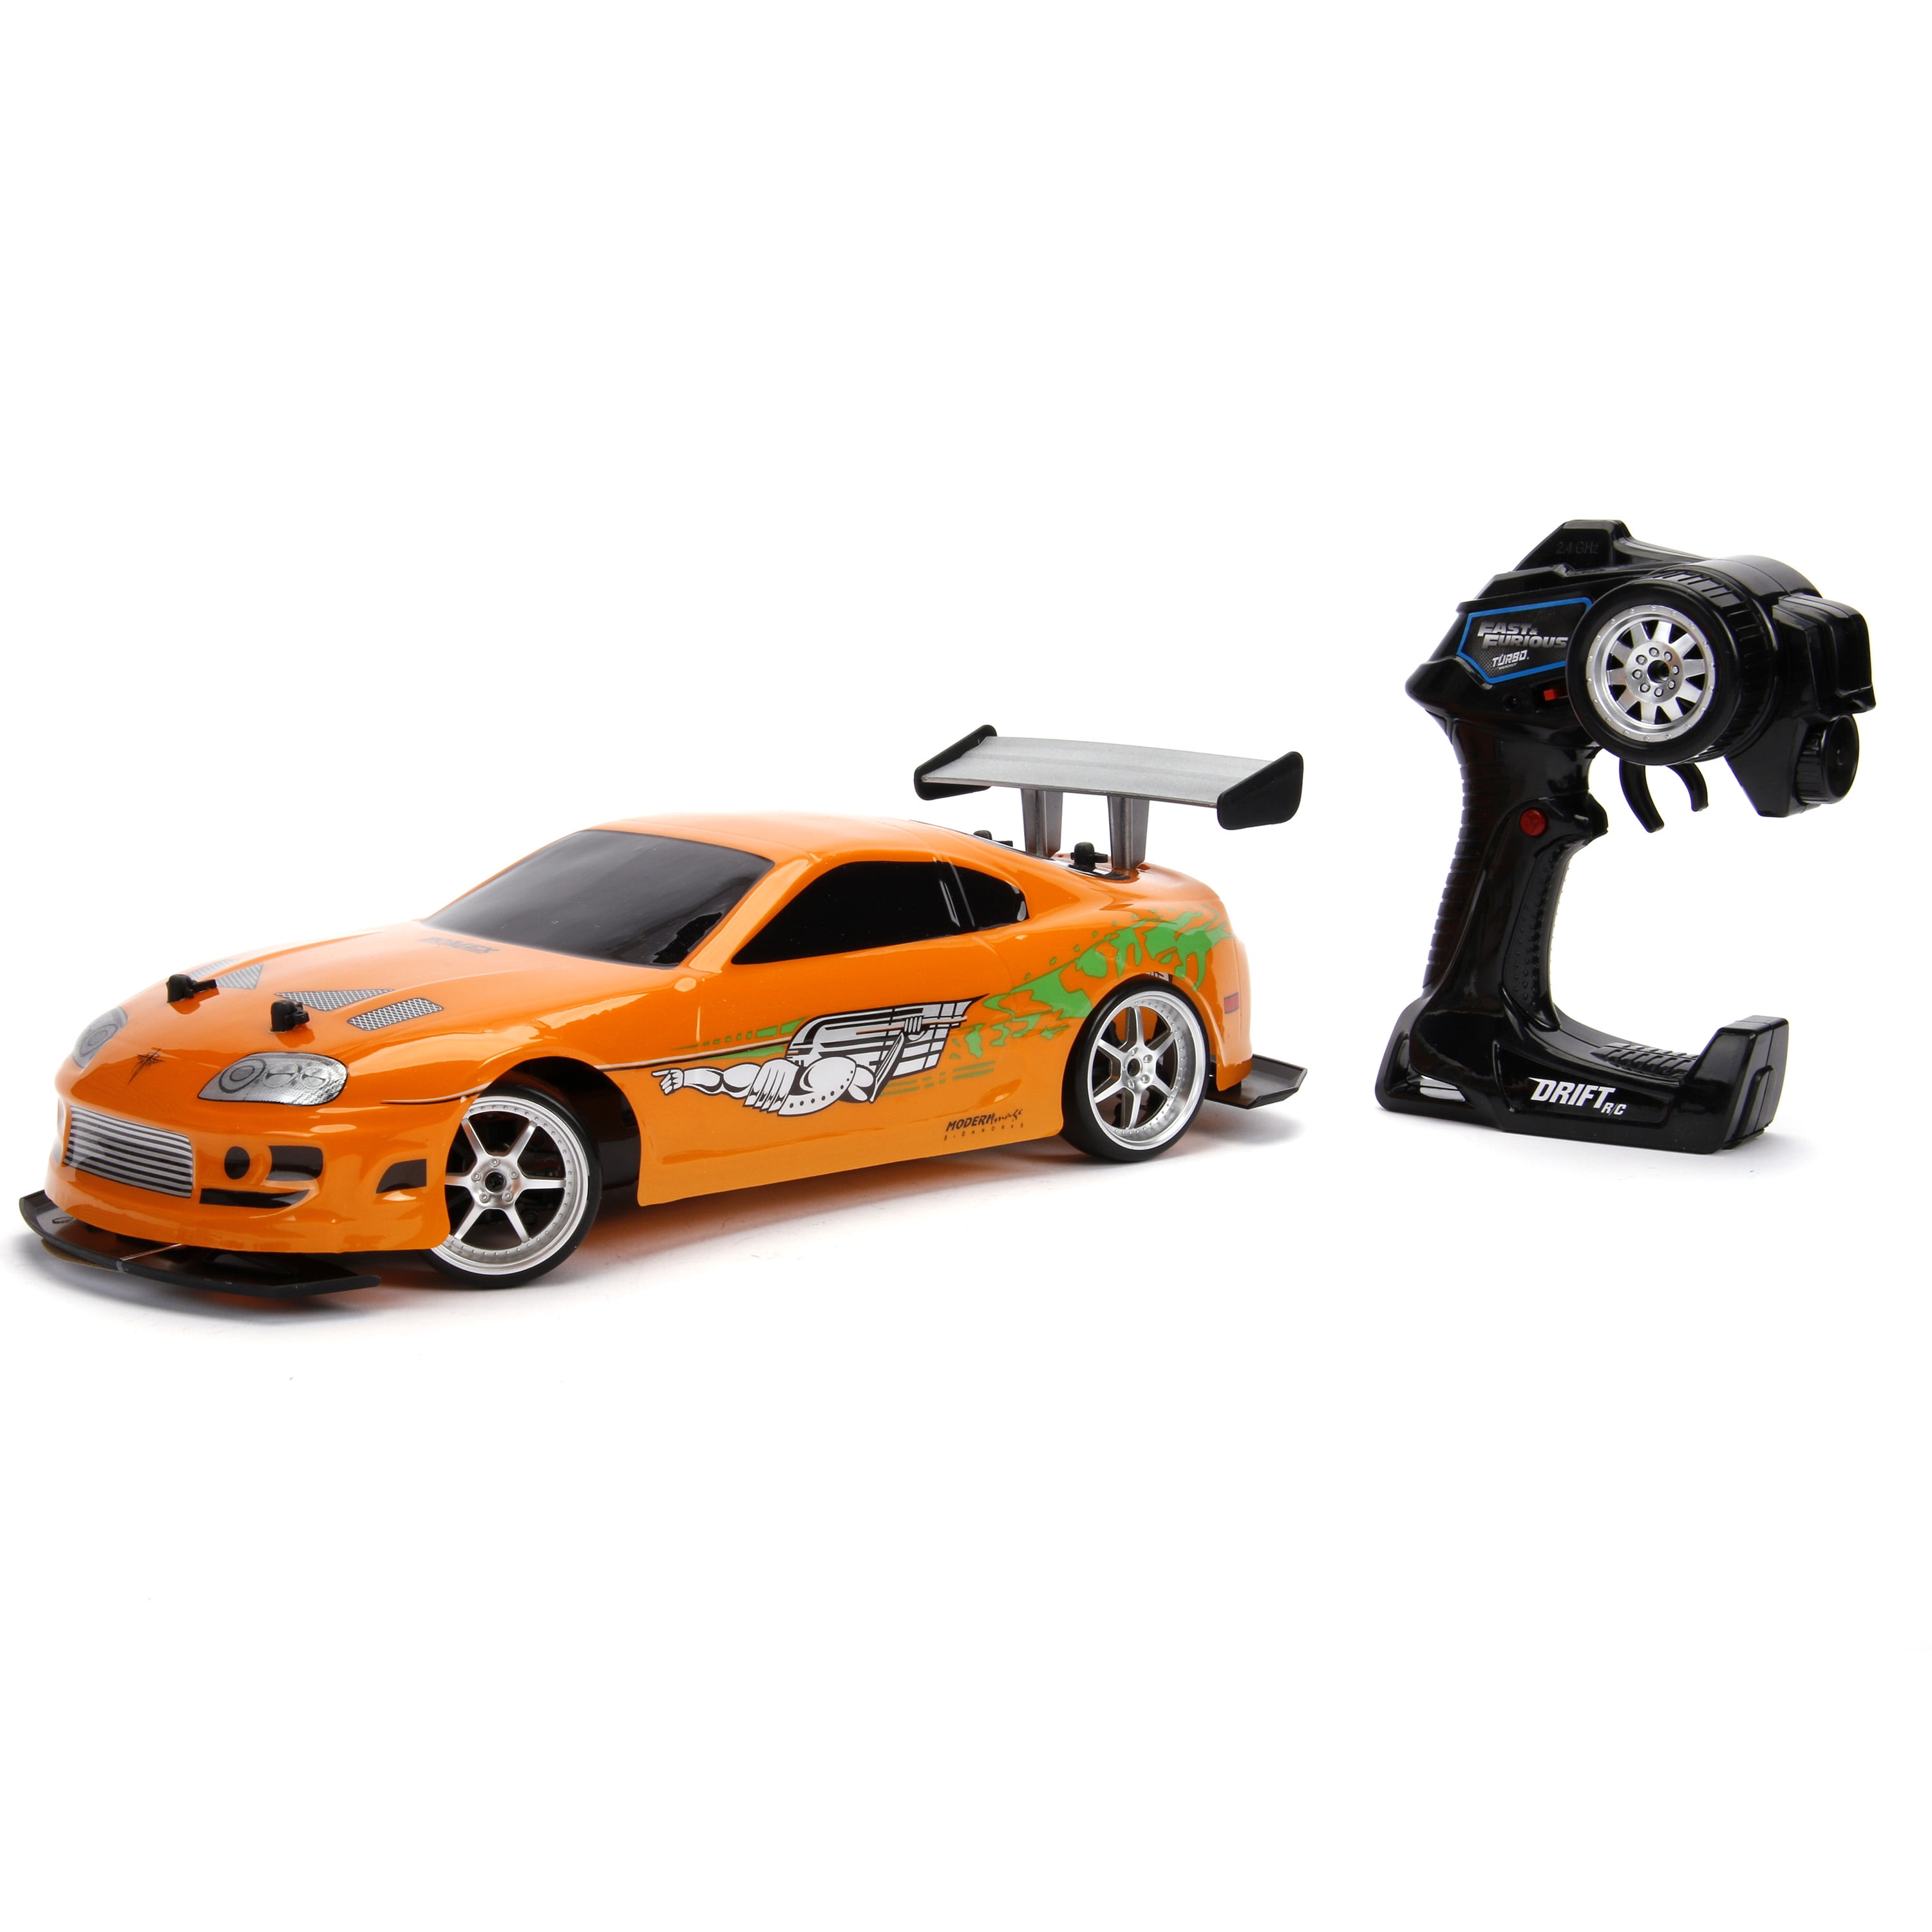 Kids Remote Control Fast and Furious 1:24 1995 Toyota Supra Drift Toy Car 